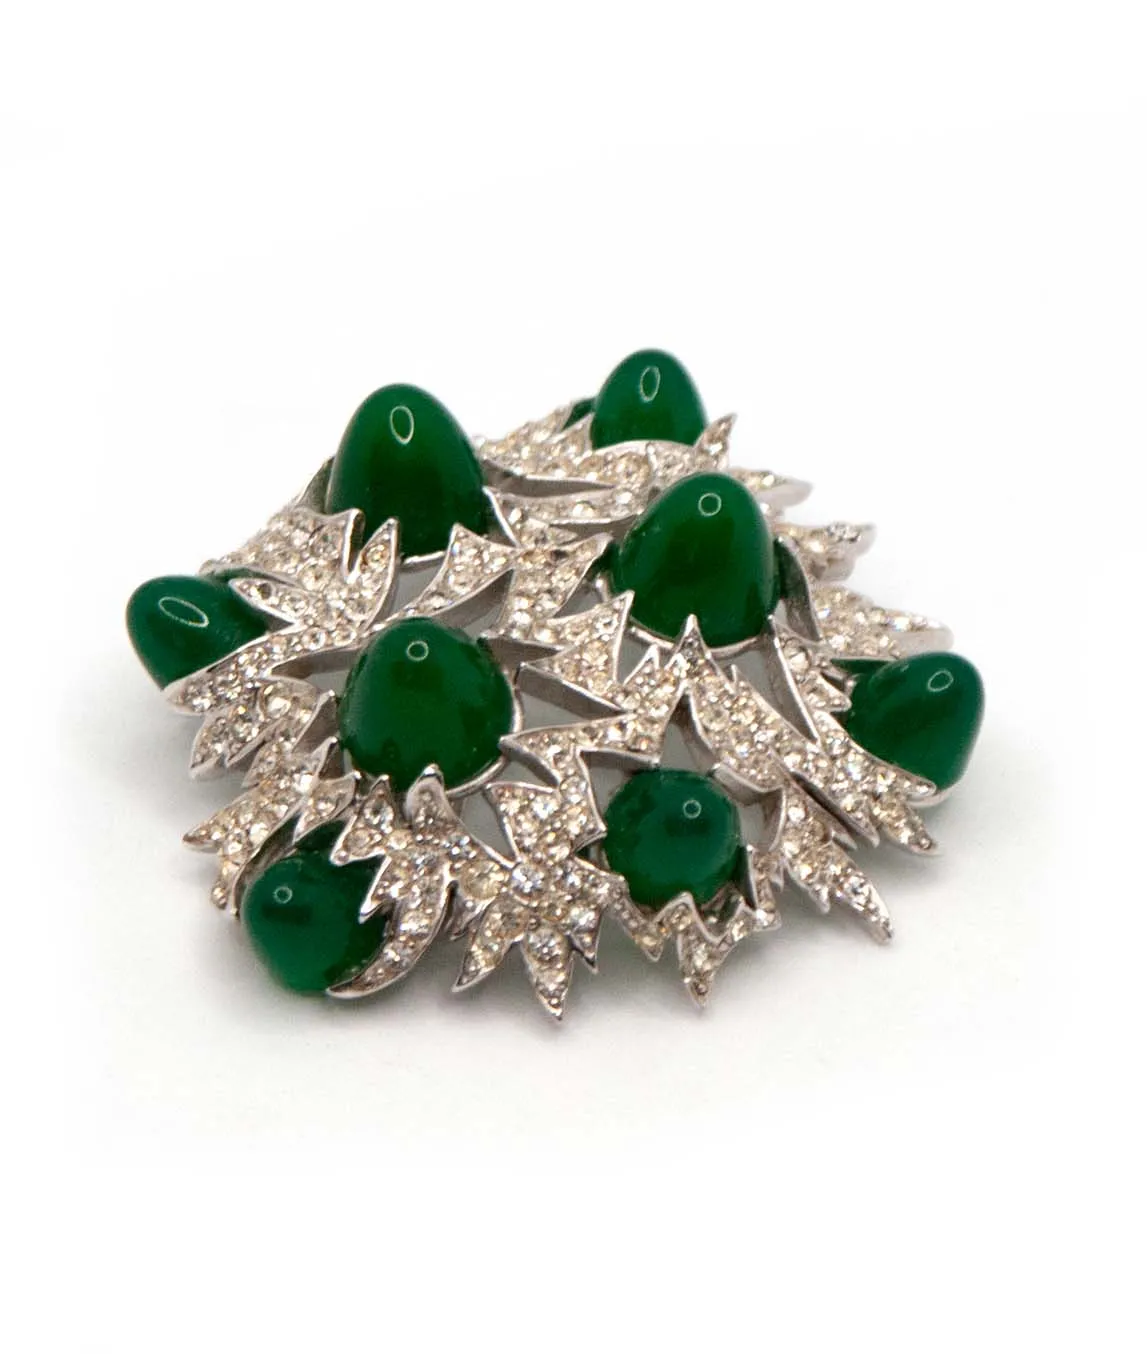 1960s Marcel Boucher brooch with pavé crystals and green bullet glass